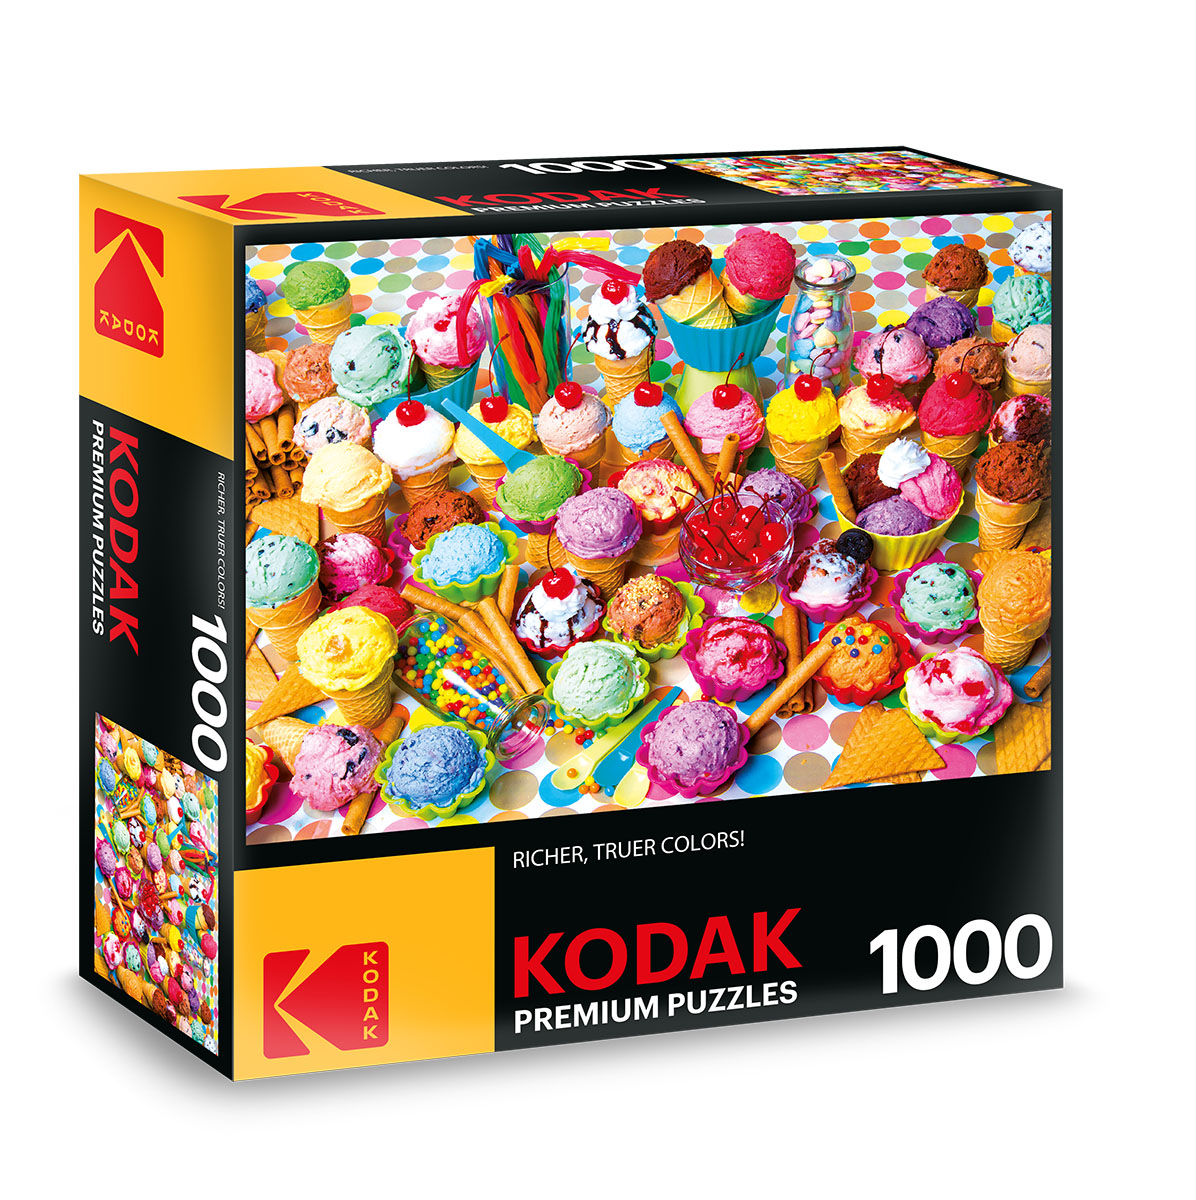 KODAK Premium Puzzles - Variety of Colorful Ice Cream - Scratch and Dent Photography Jigsaw Puzzle